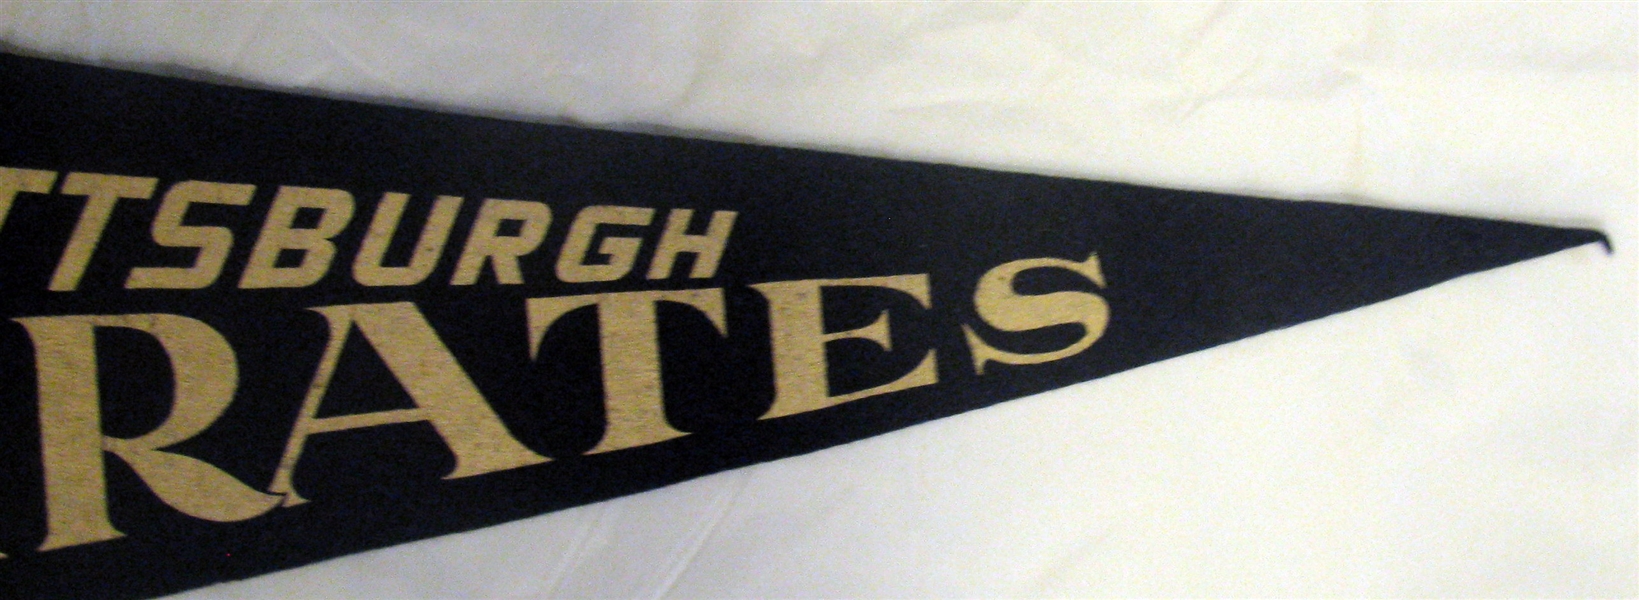 50's PITTSBURGH PIRATES 3/4 SIZE PENNANT